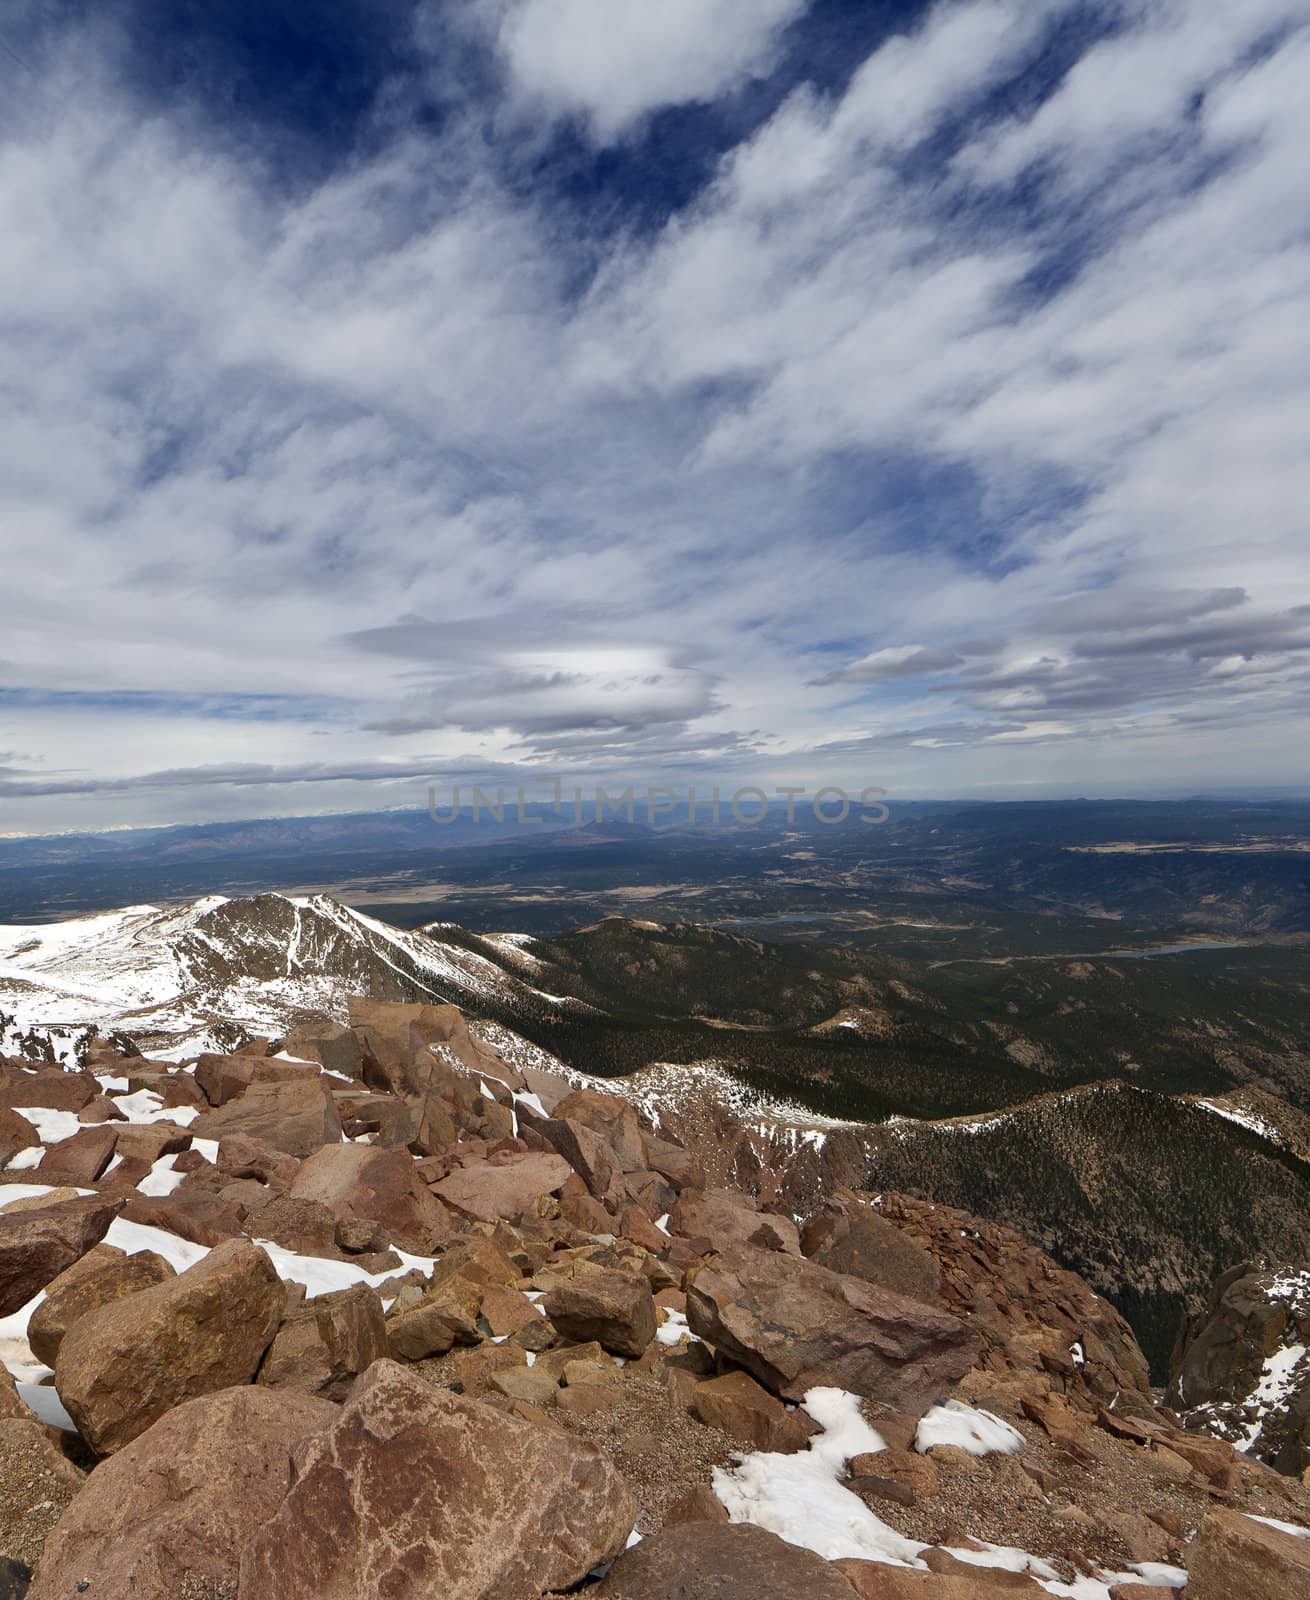 The view from the top of Pikes Peak